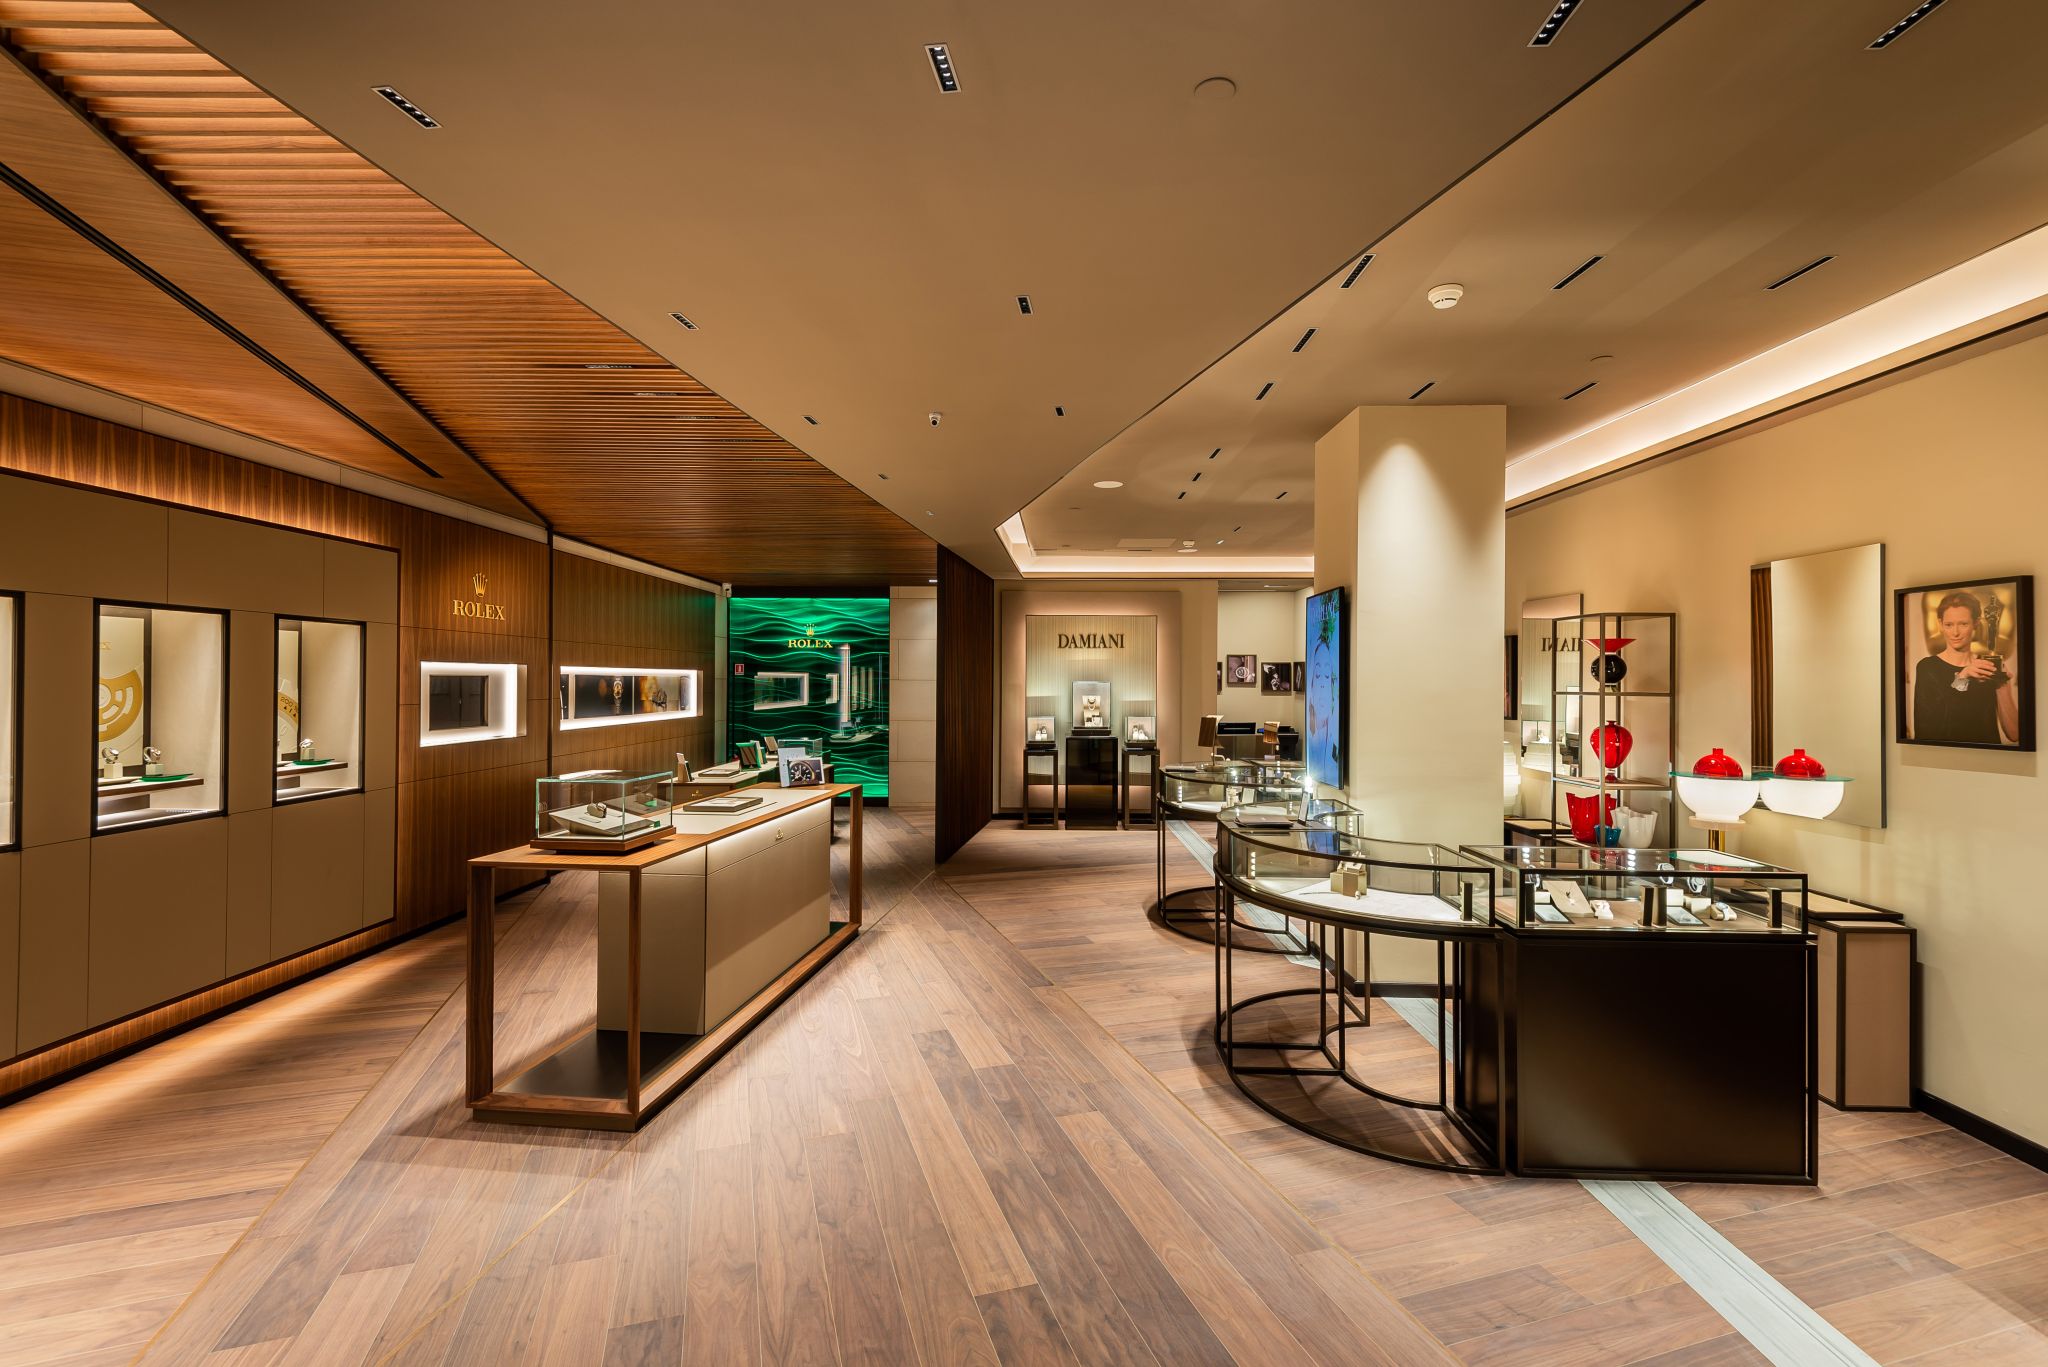 ROCCA 1794 ANNOUNCES THE OPENING OF A NEW PRESTIGIOUS BOUTIQUE AT MILAN MALPENSA AIRPORT